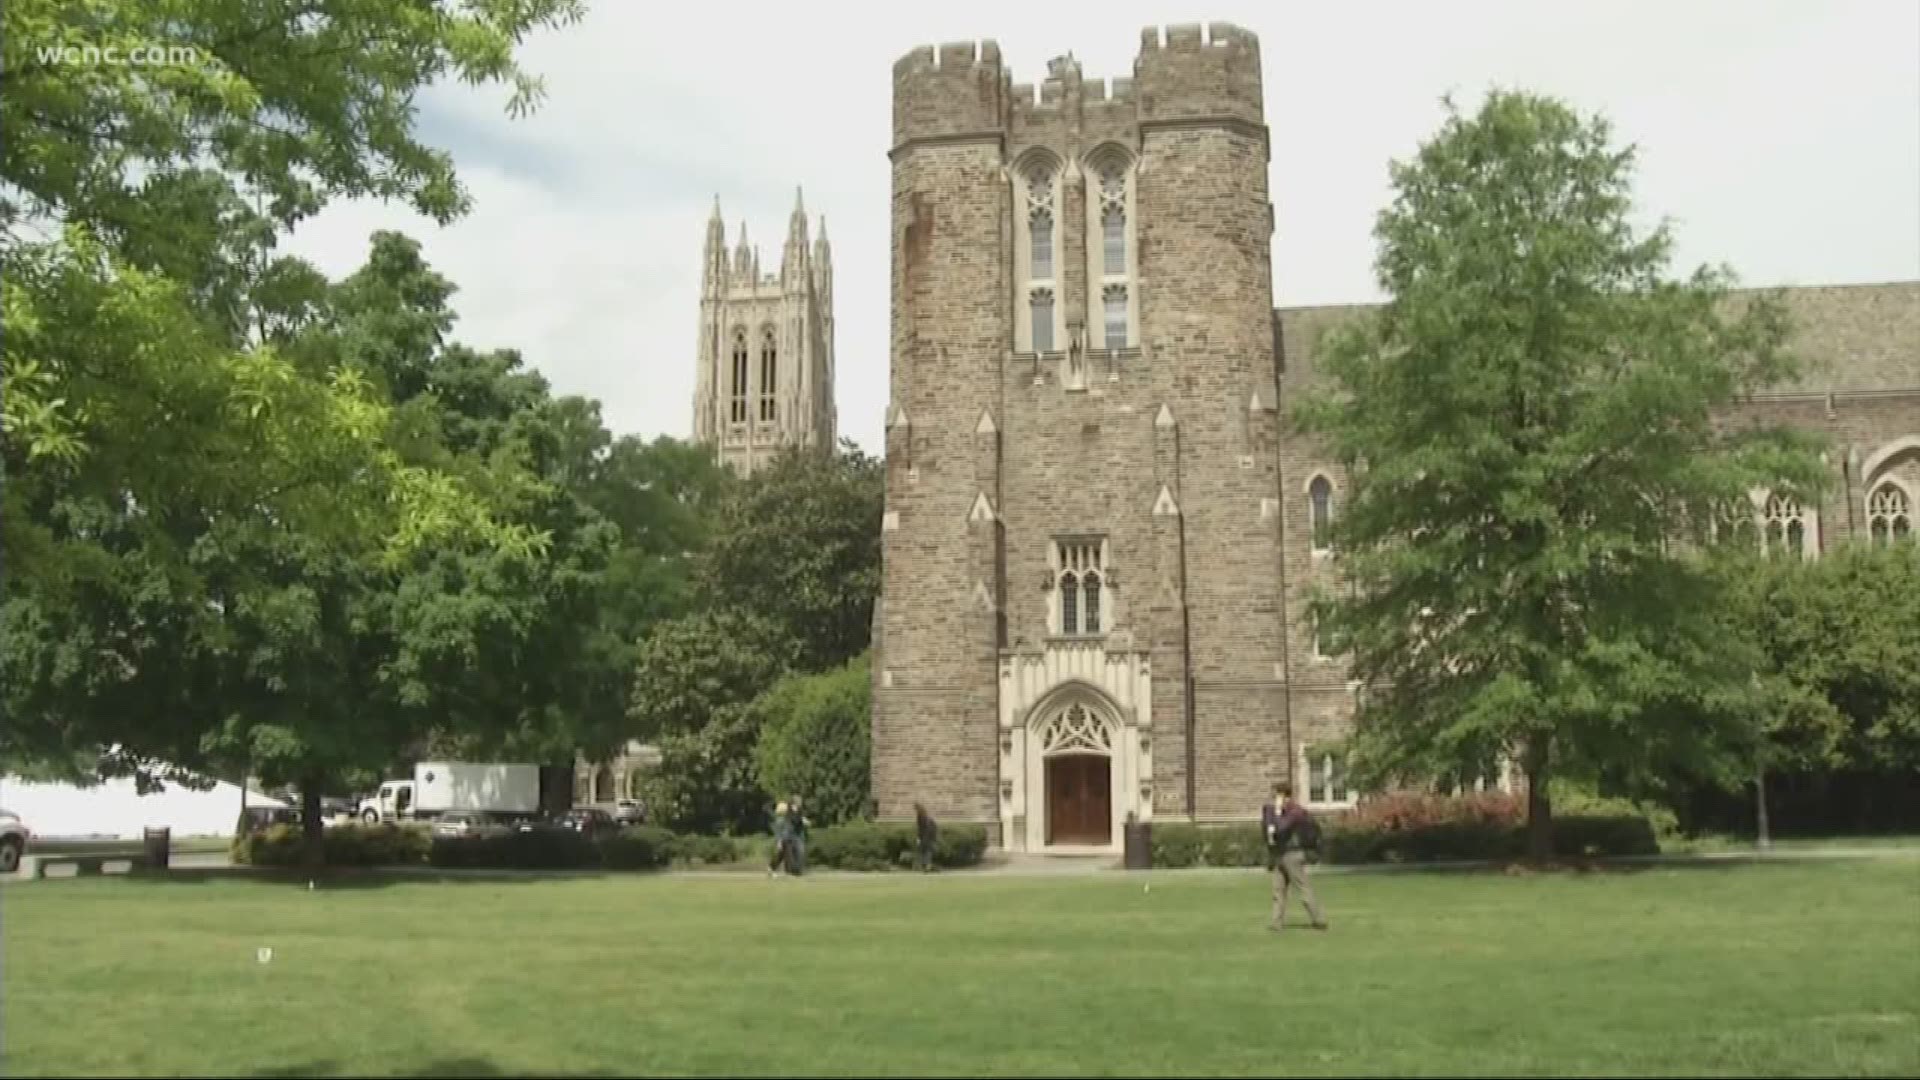 If you went to Duke or NC State, your education is probably paying off. According to a new study from CNBC, both schools are among the 50 best schools where alumni make the most money after graduation.